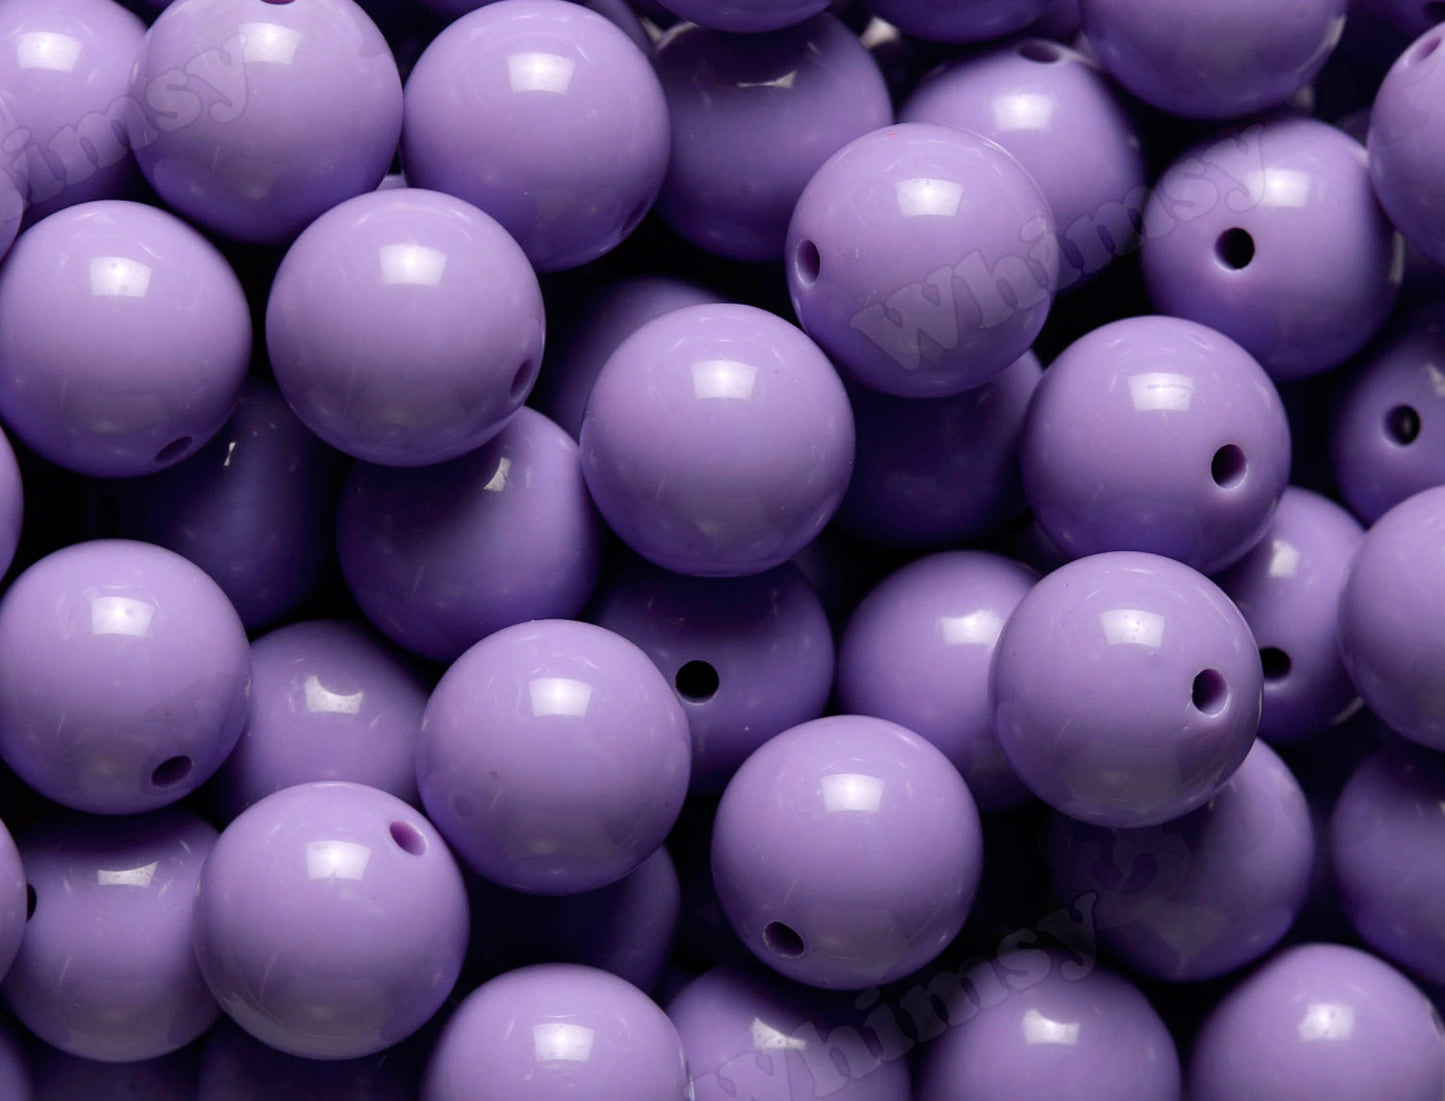 Purple 20mm Solid Bubblegum Beads for DIY Jewelry by WhimsyandPOP